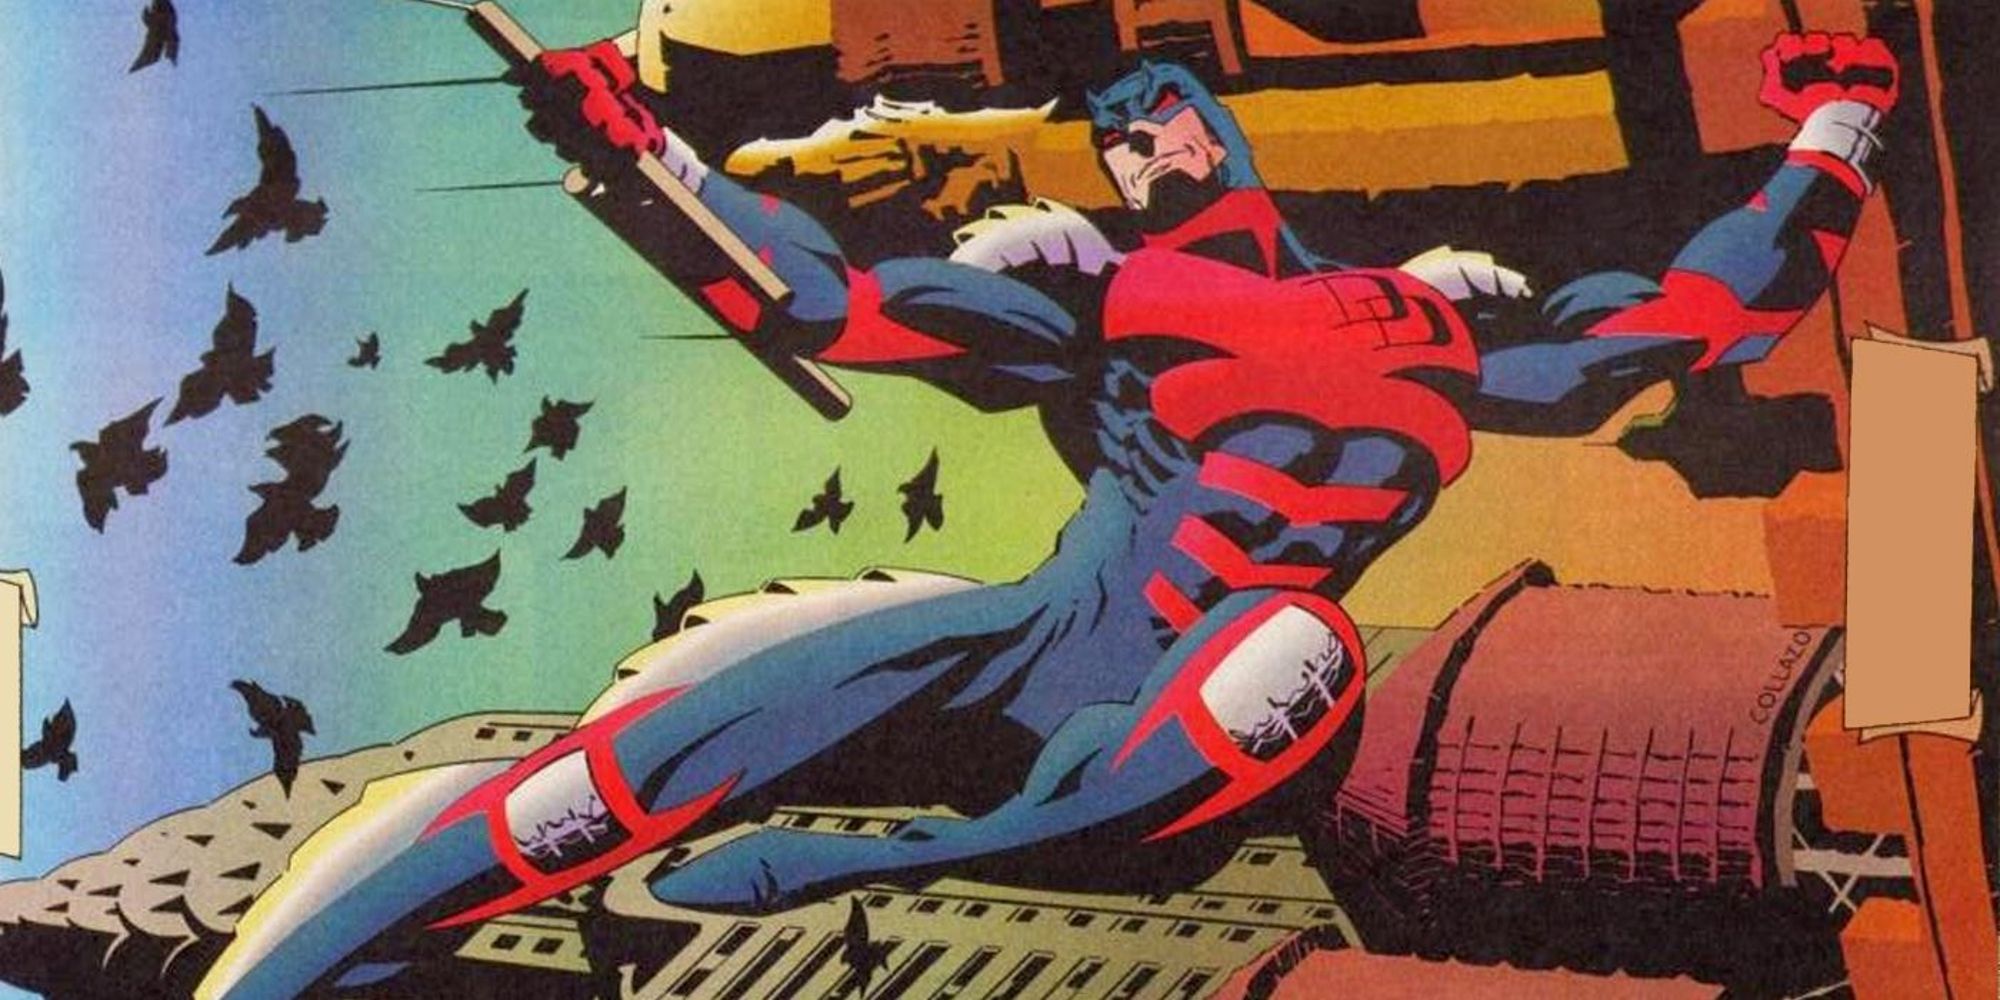 Daredevil as depicted in his 90s armored costume in Marvel comics